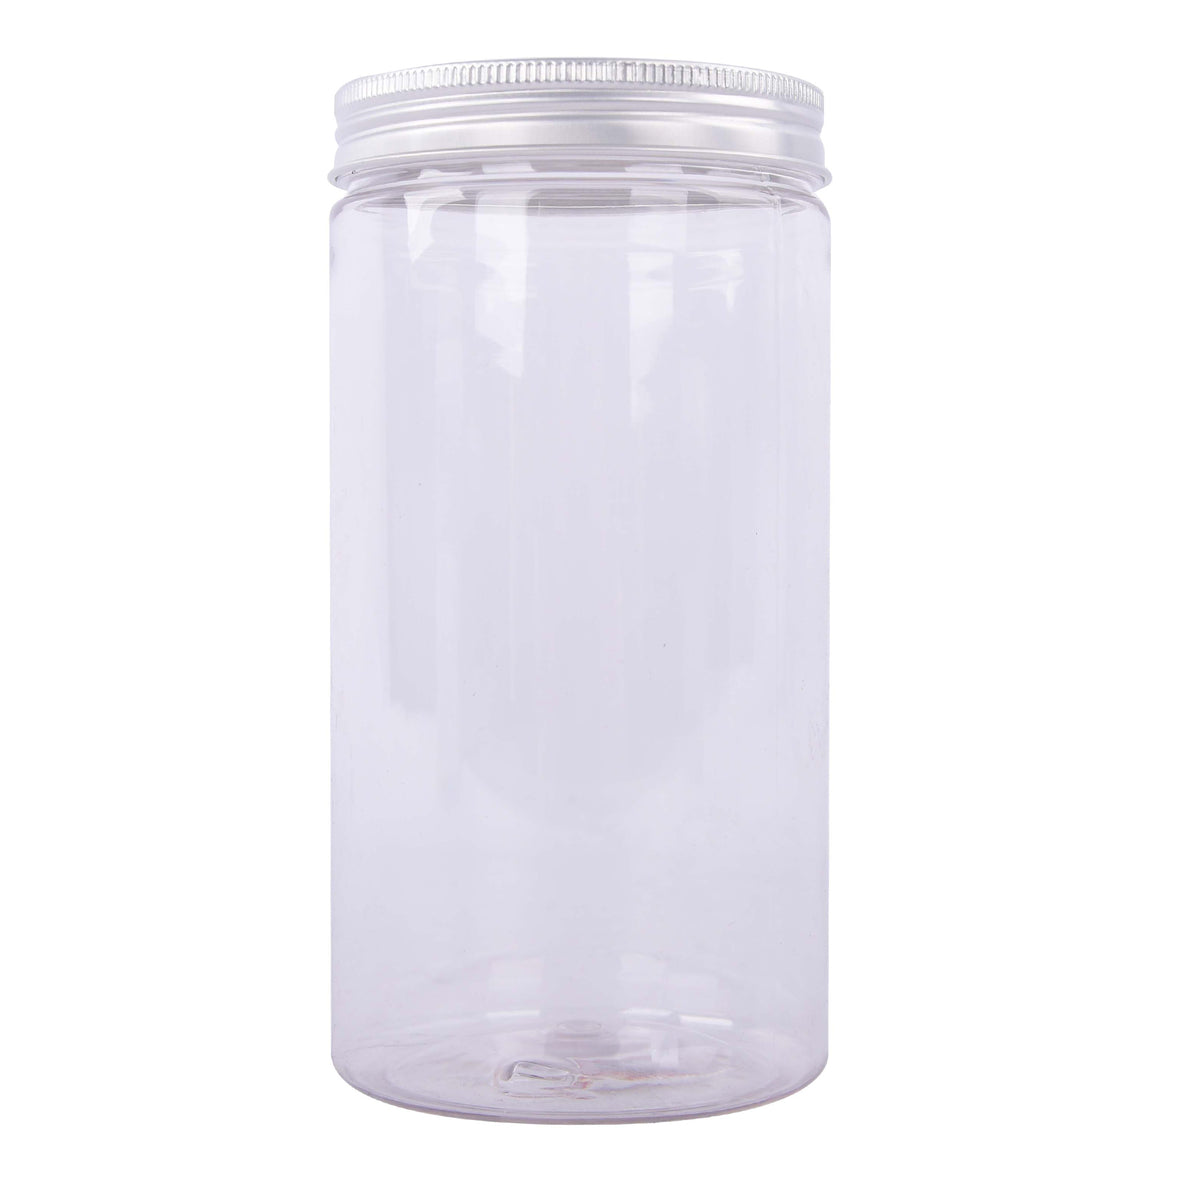 Plastic storage canister